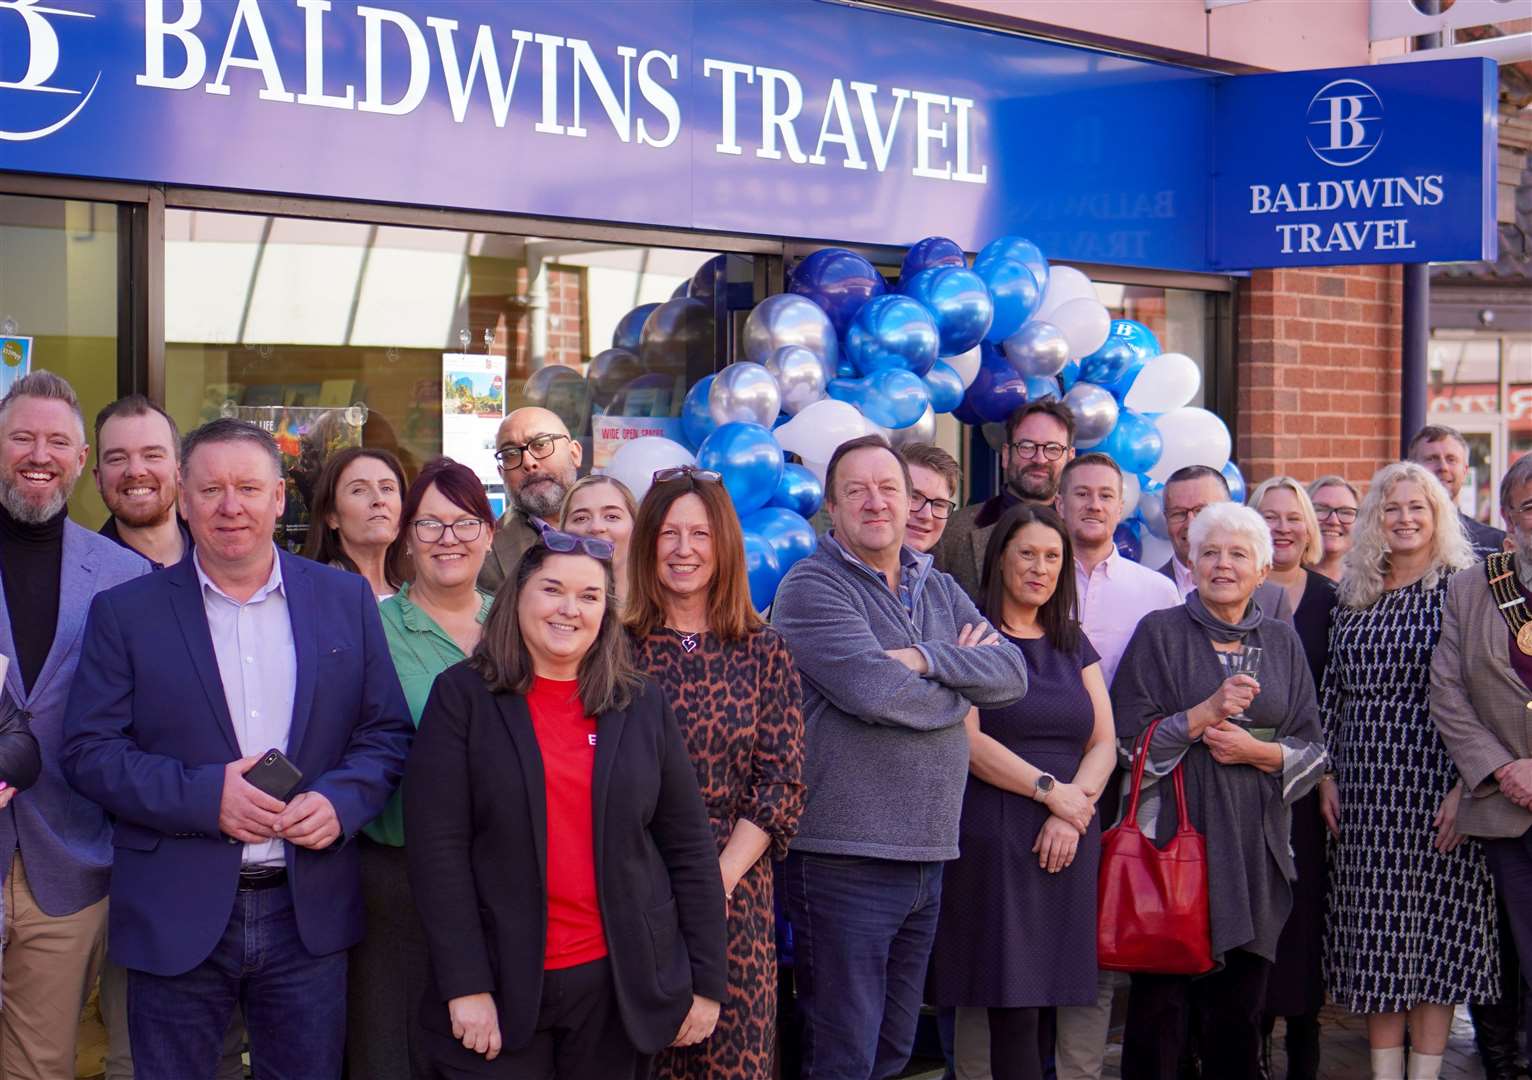 Kent-headquartered Baldwins is looking to spread its wings across the UK through acquisitions